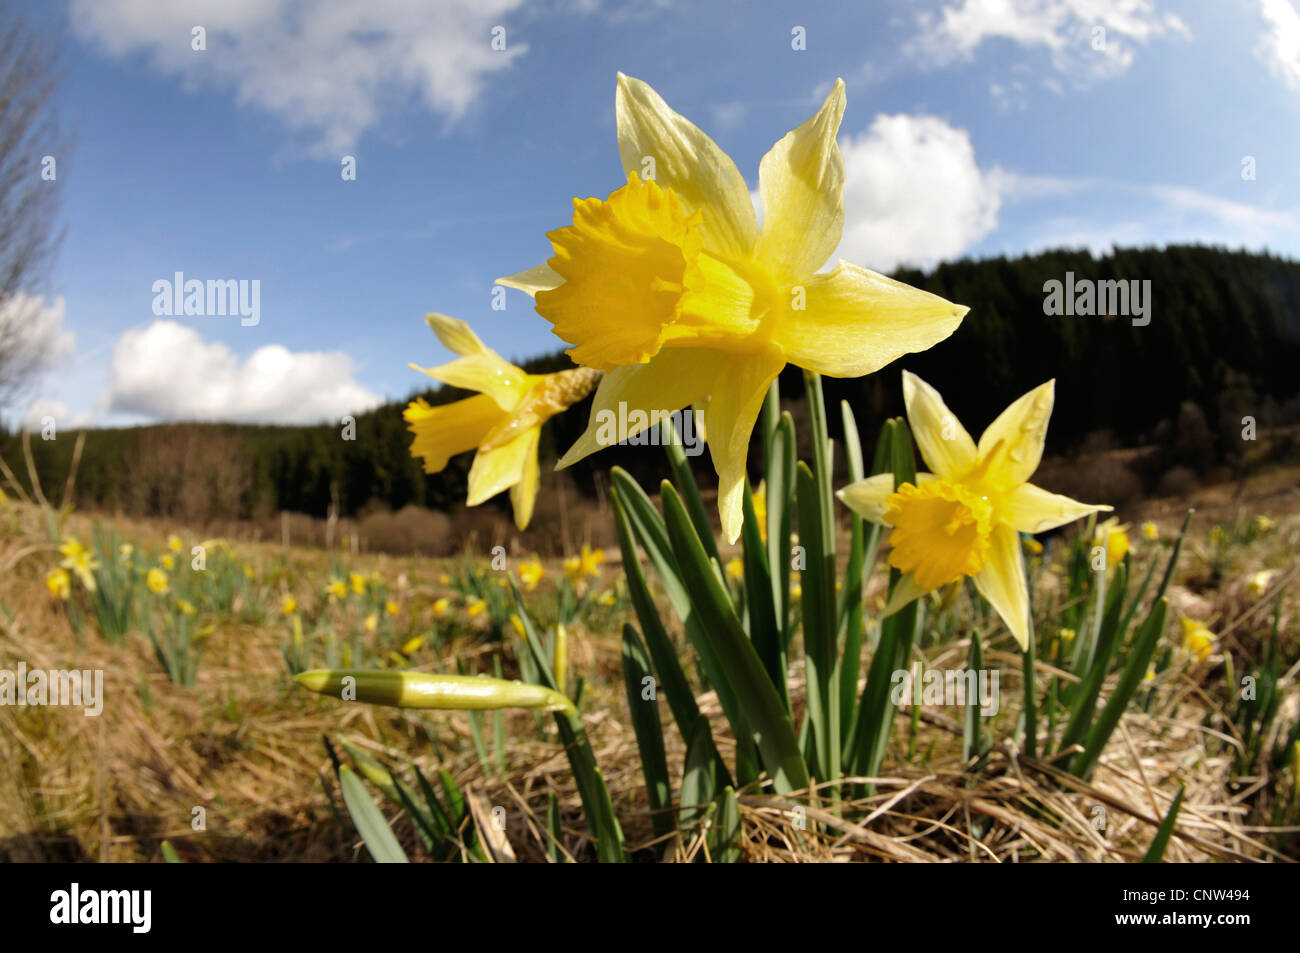 common daffodil (Narcissus pseudonarcissus), wild plants blooming in a meadow, Germany, North Rhine-Westphalia, Eifel Stock Photo